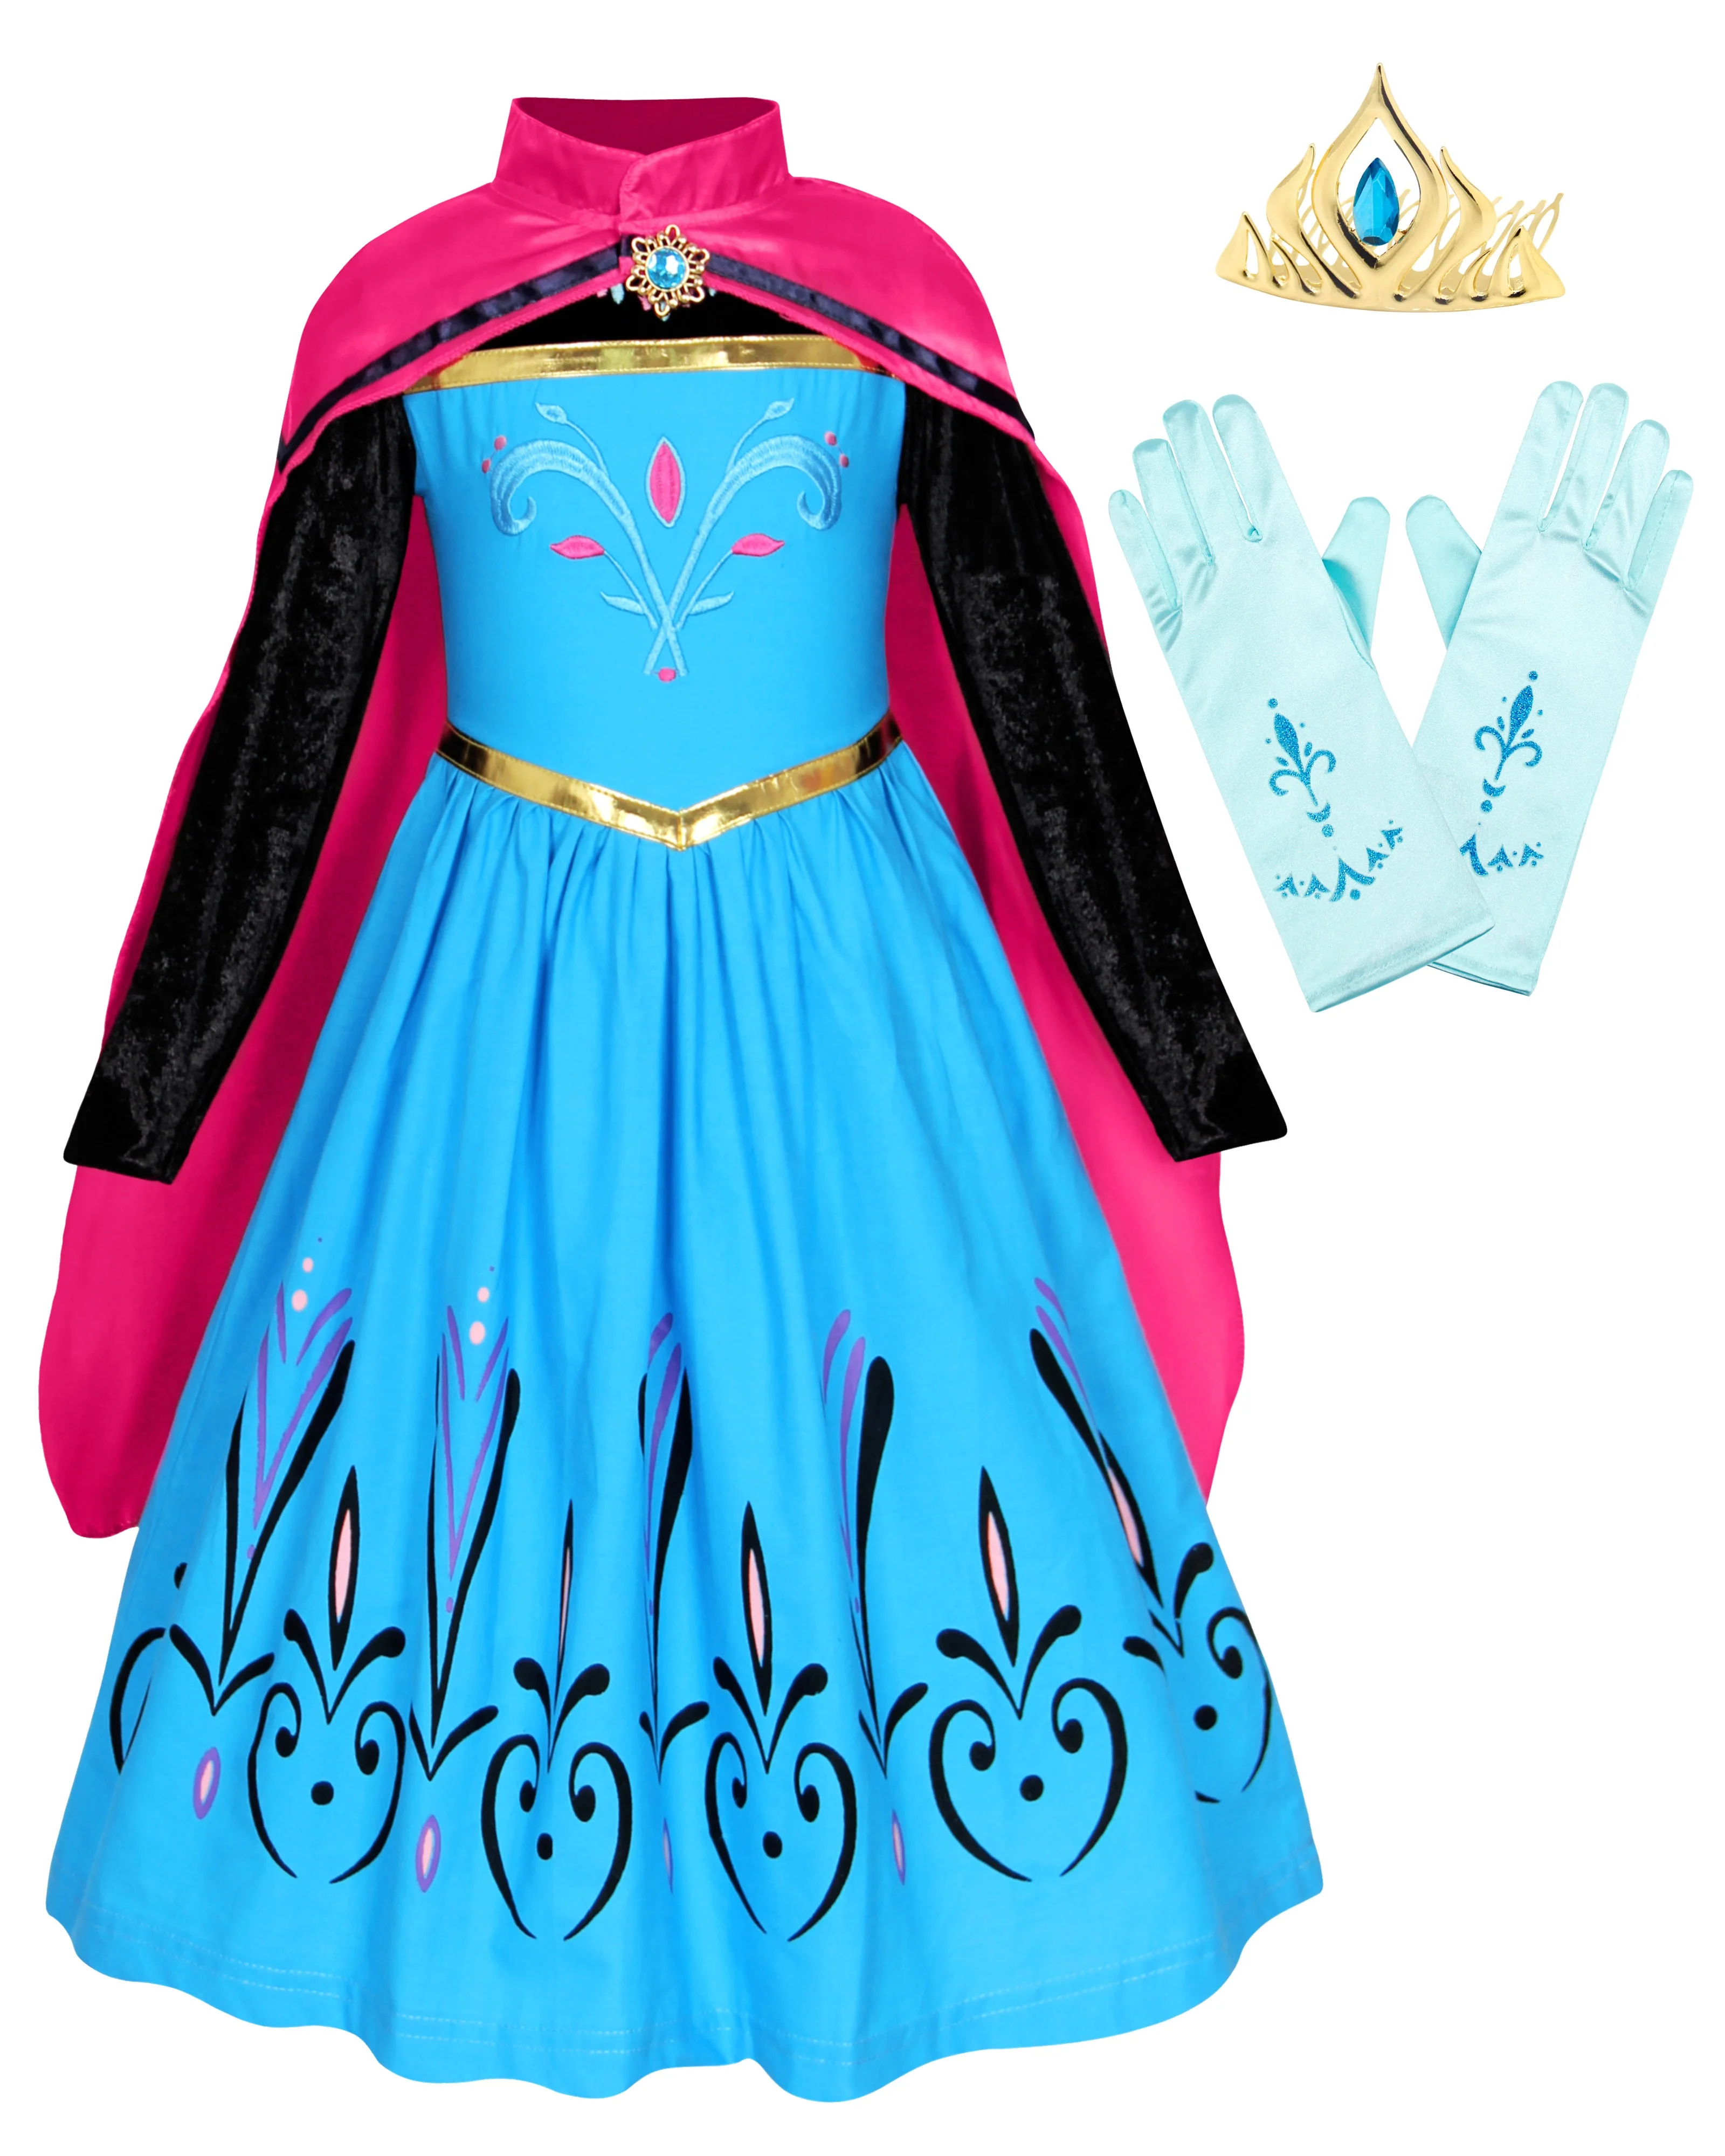 
Hot Sell Princess Anna Elsa Costume Fancy Party Cosplay Role Play Dress  (62306246900)